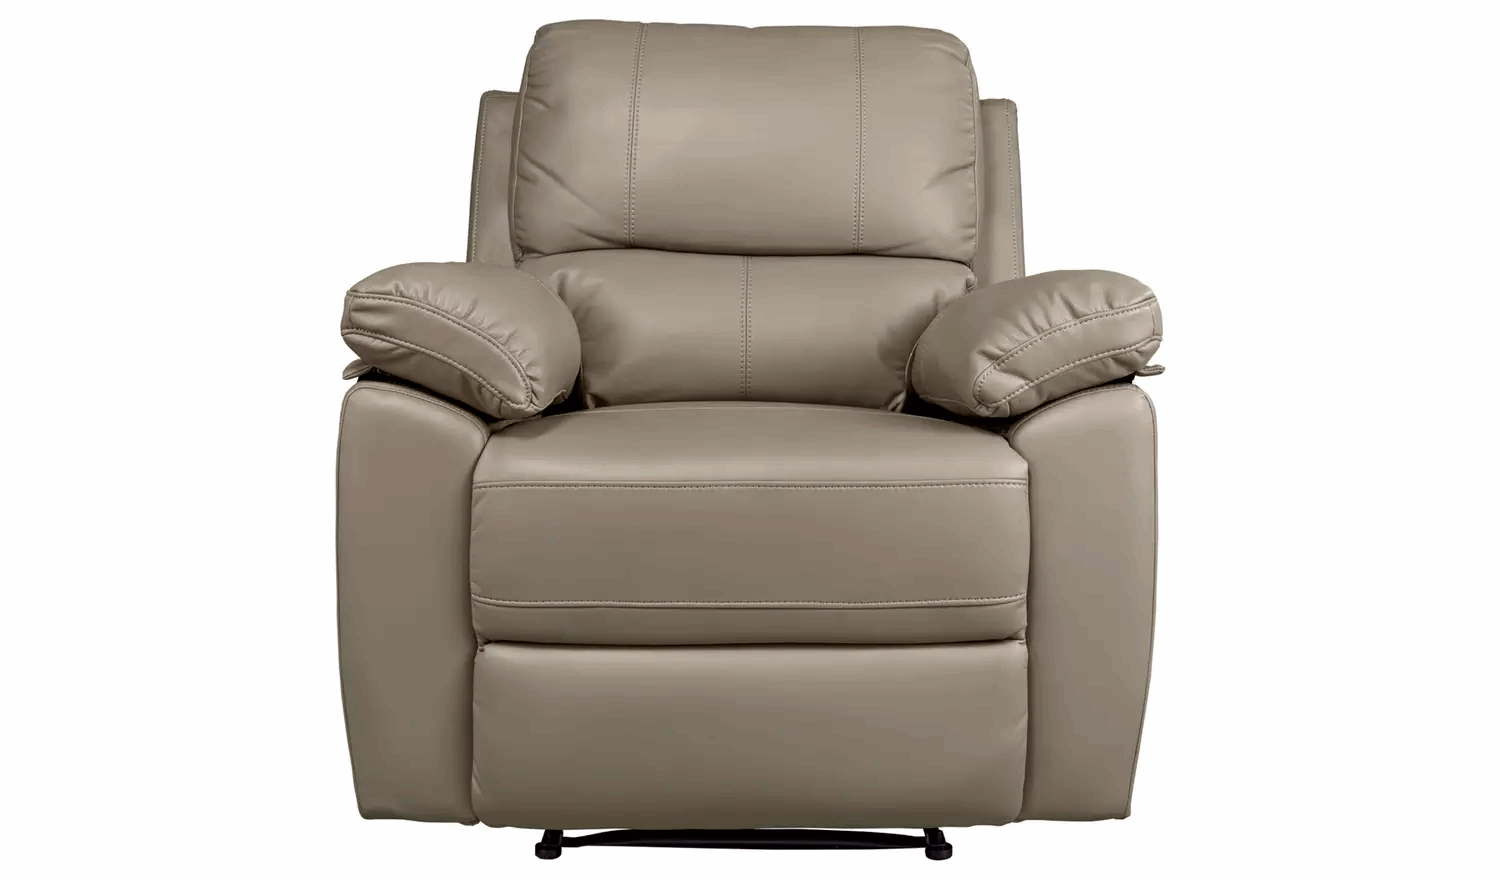 Home Toby Faux Leather Manual Recliner Chair - Grey